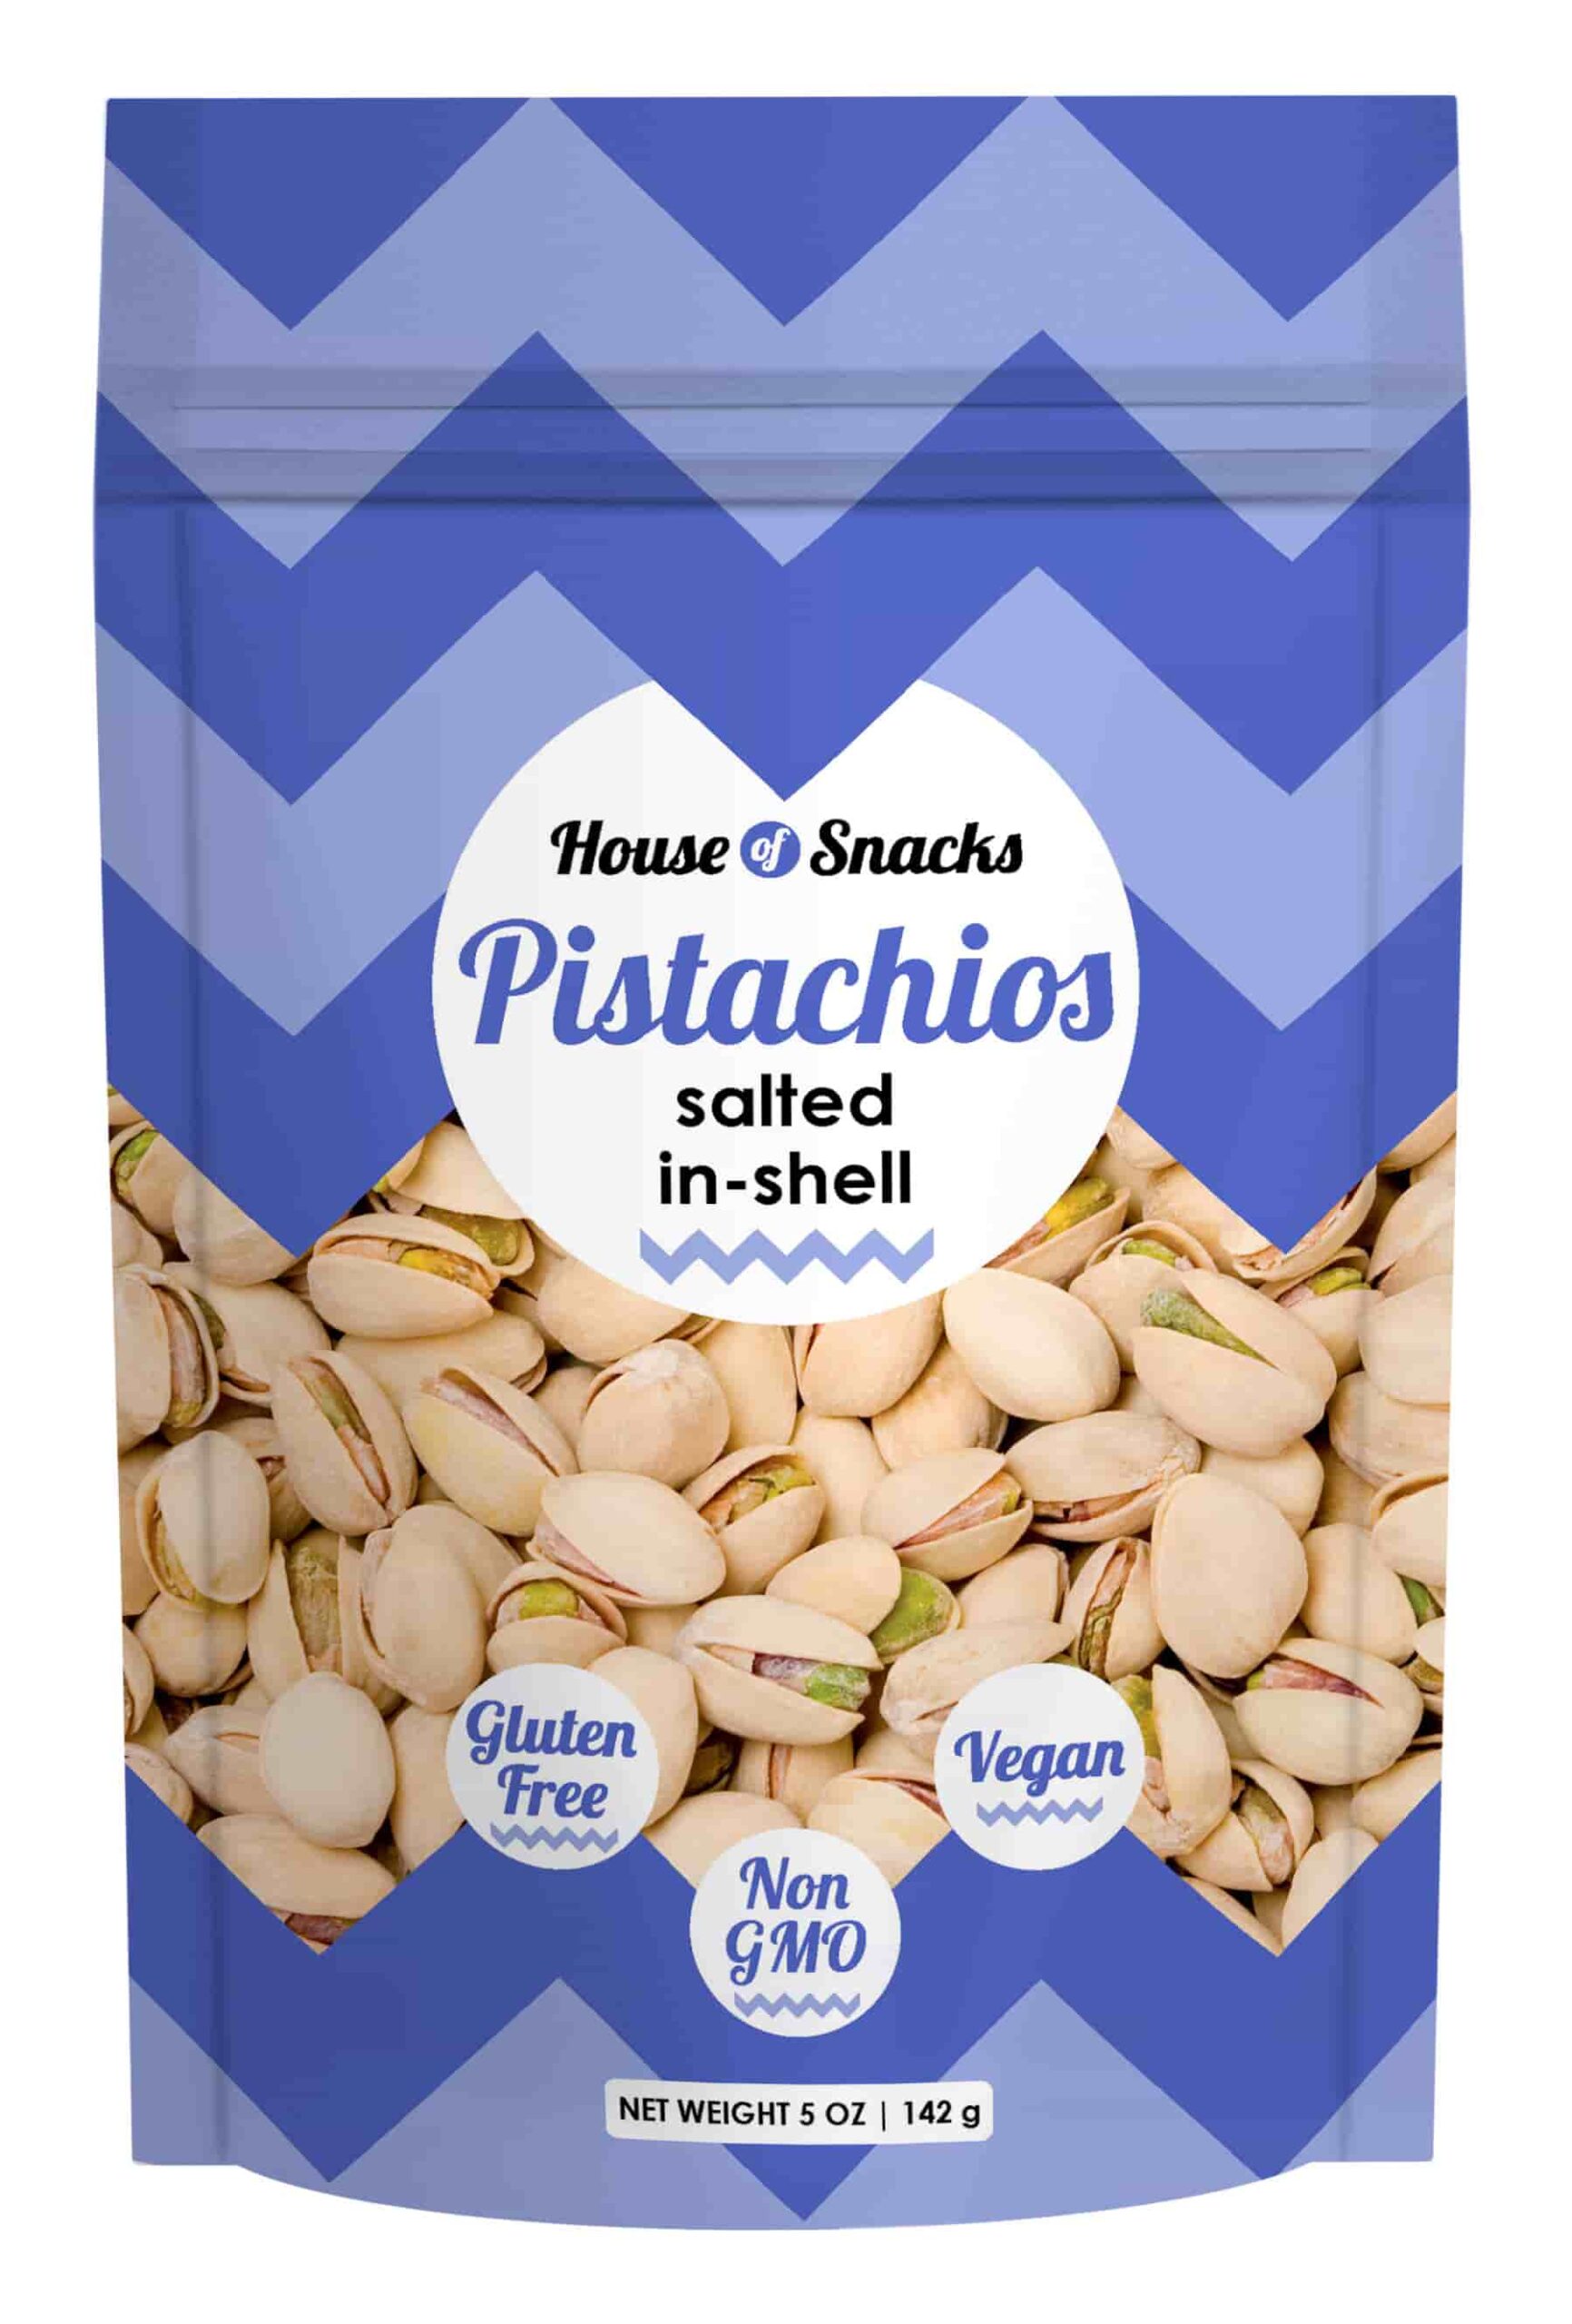 Pistachios Salted